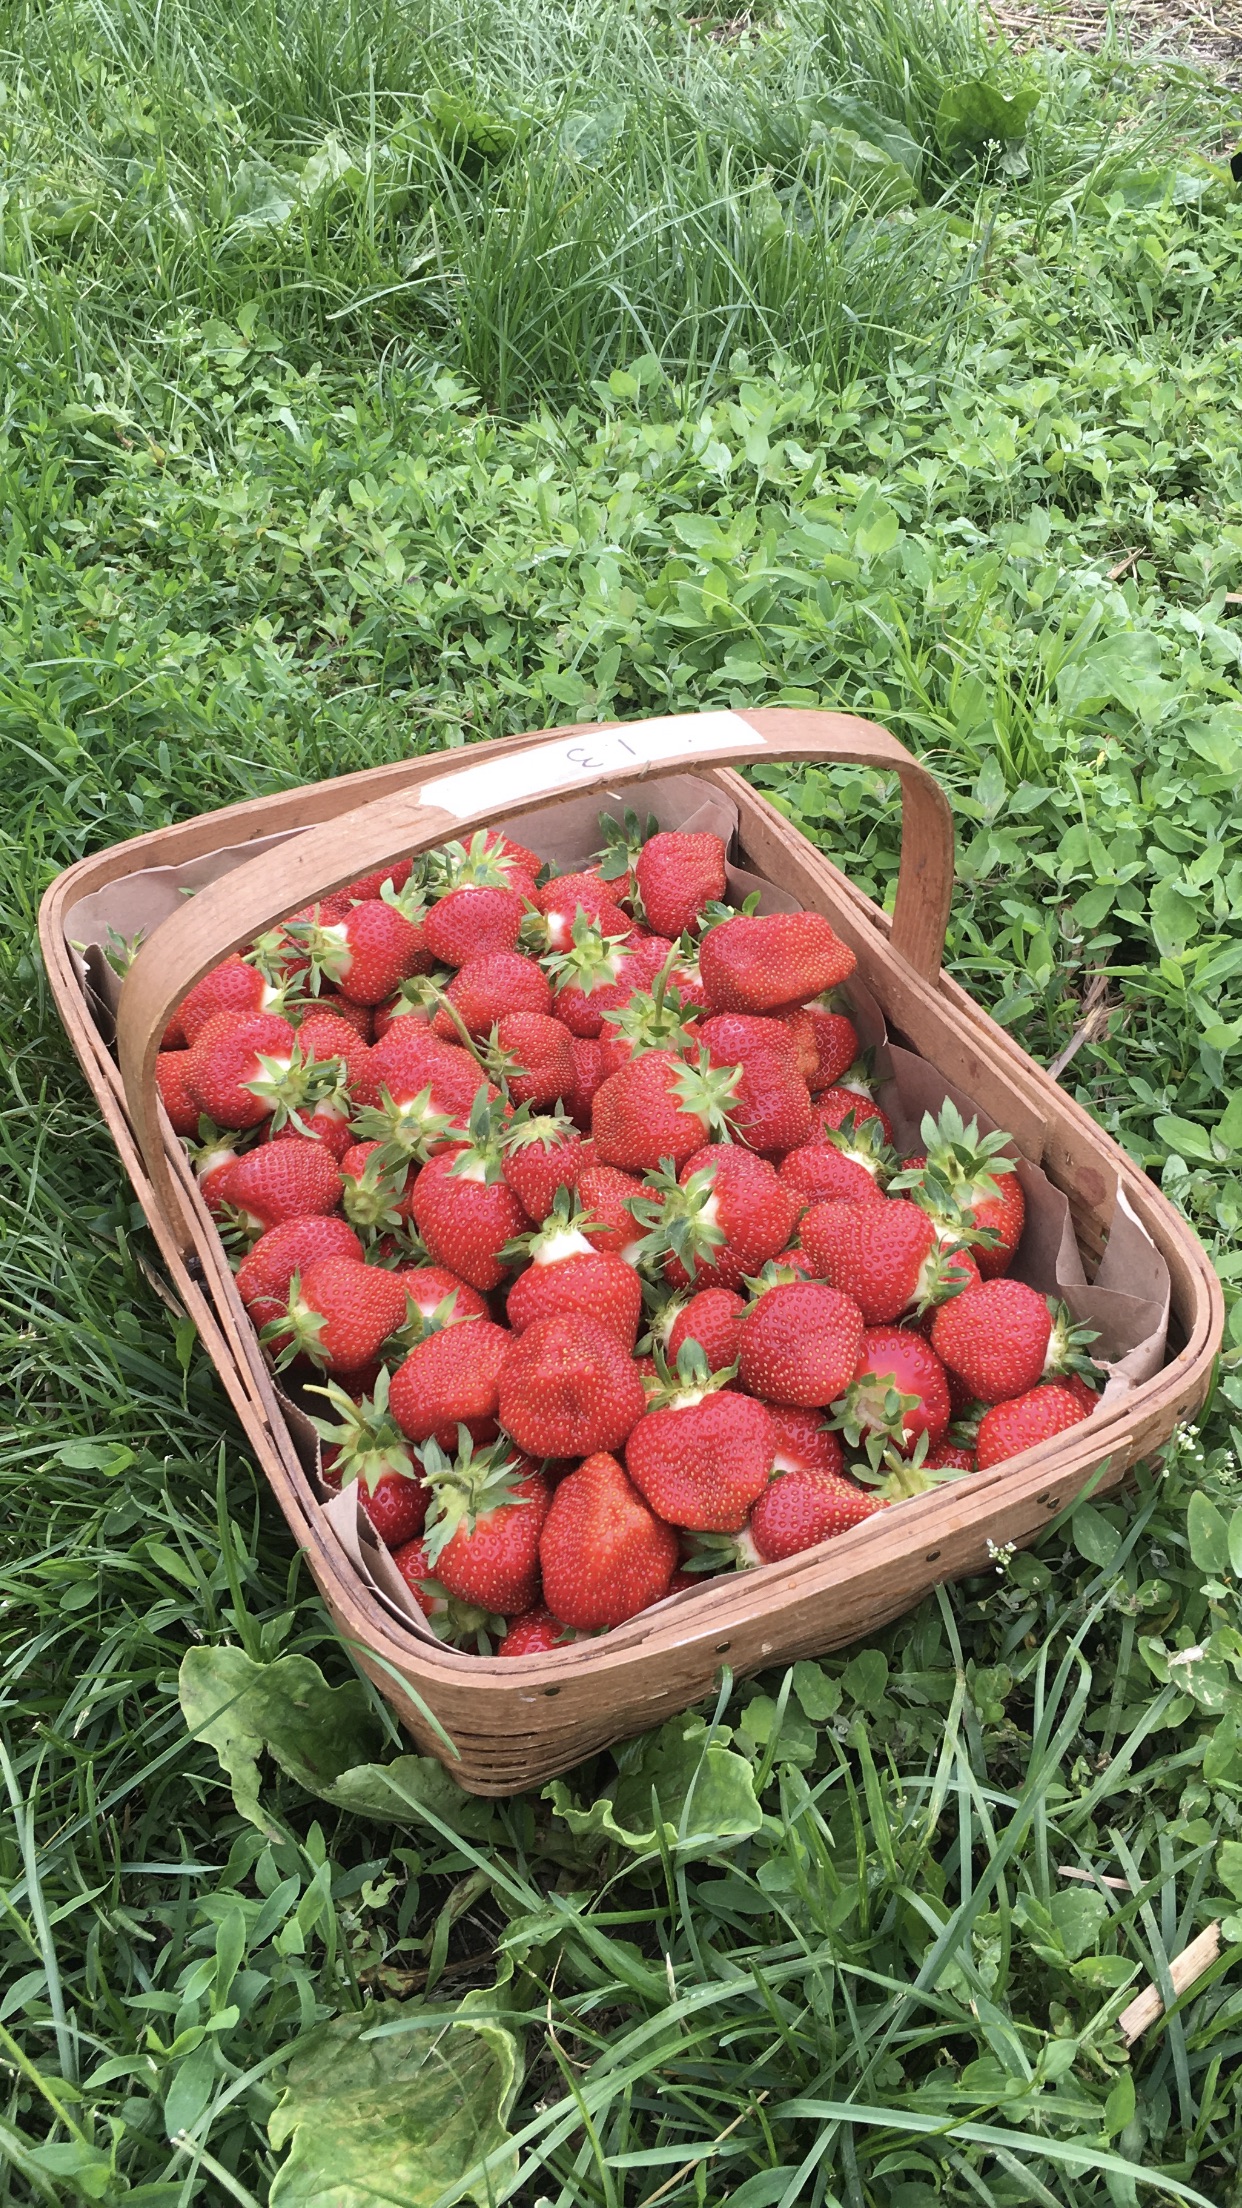 Pick Your Own Strawberries at Parlee Farms